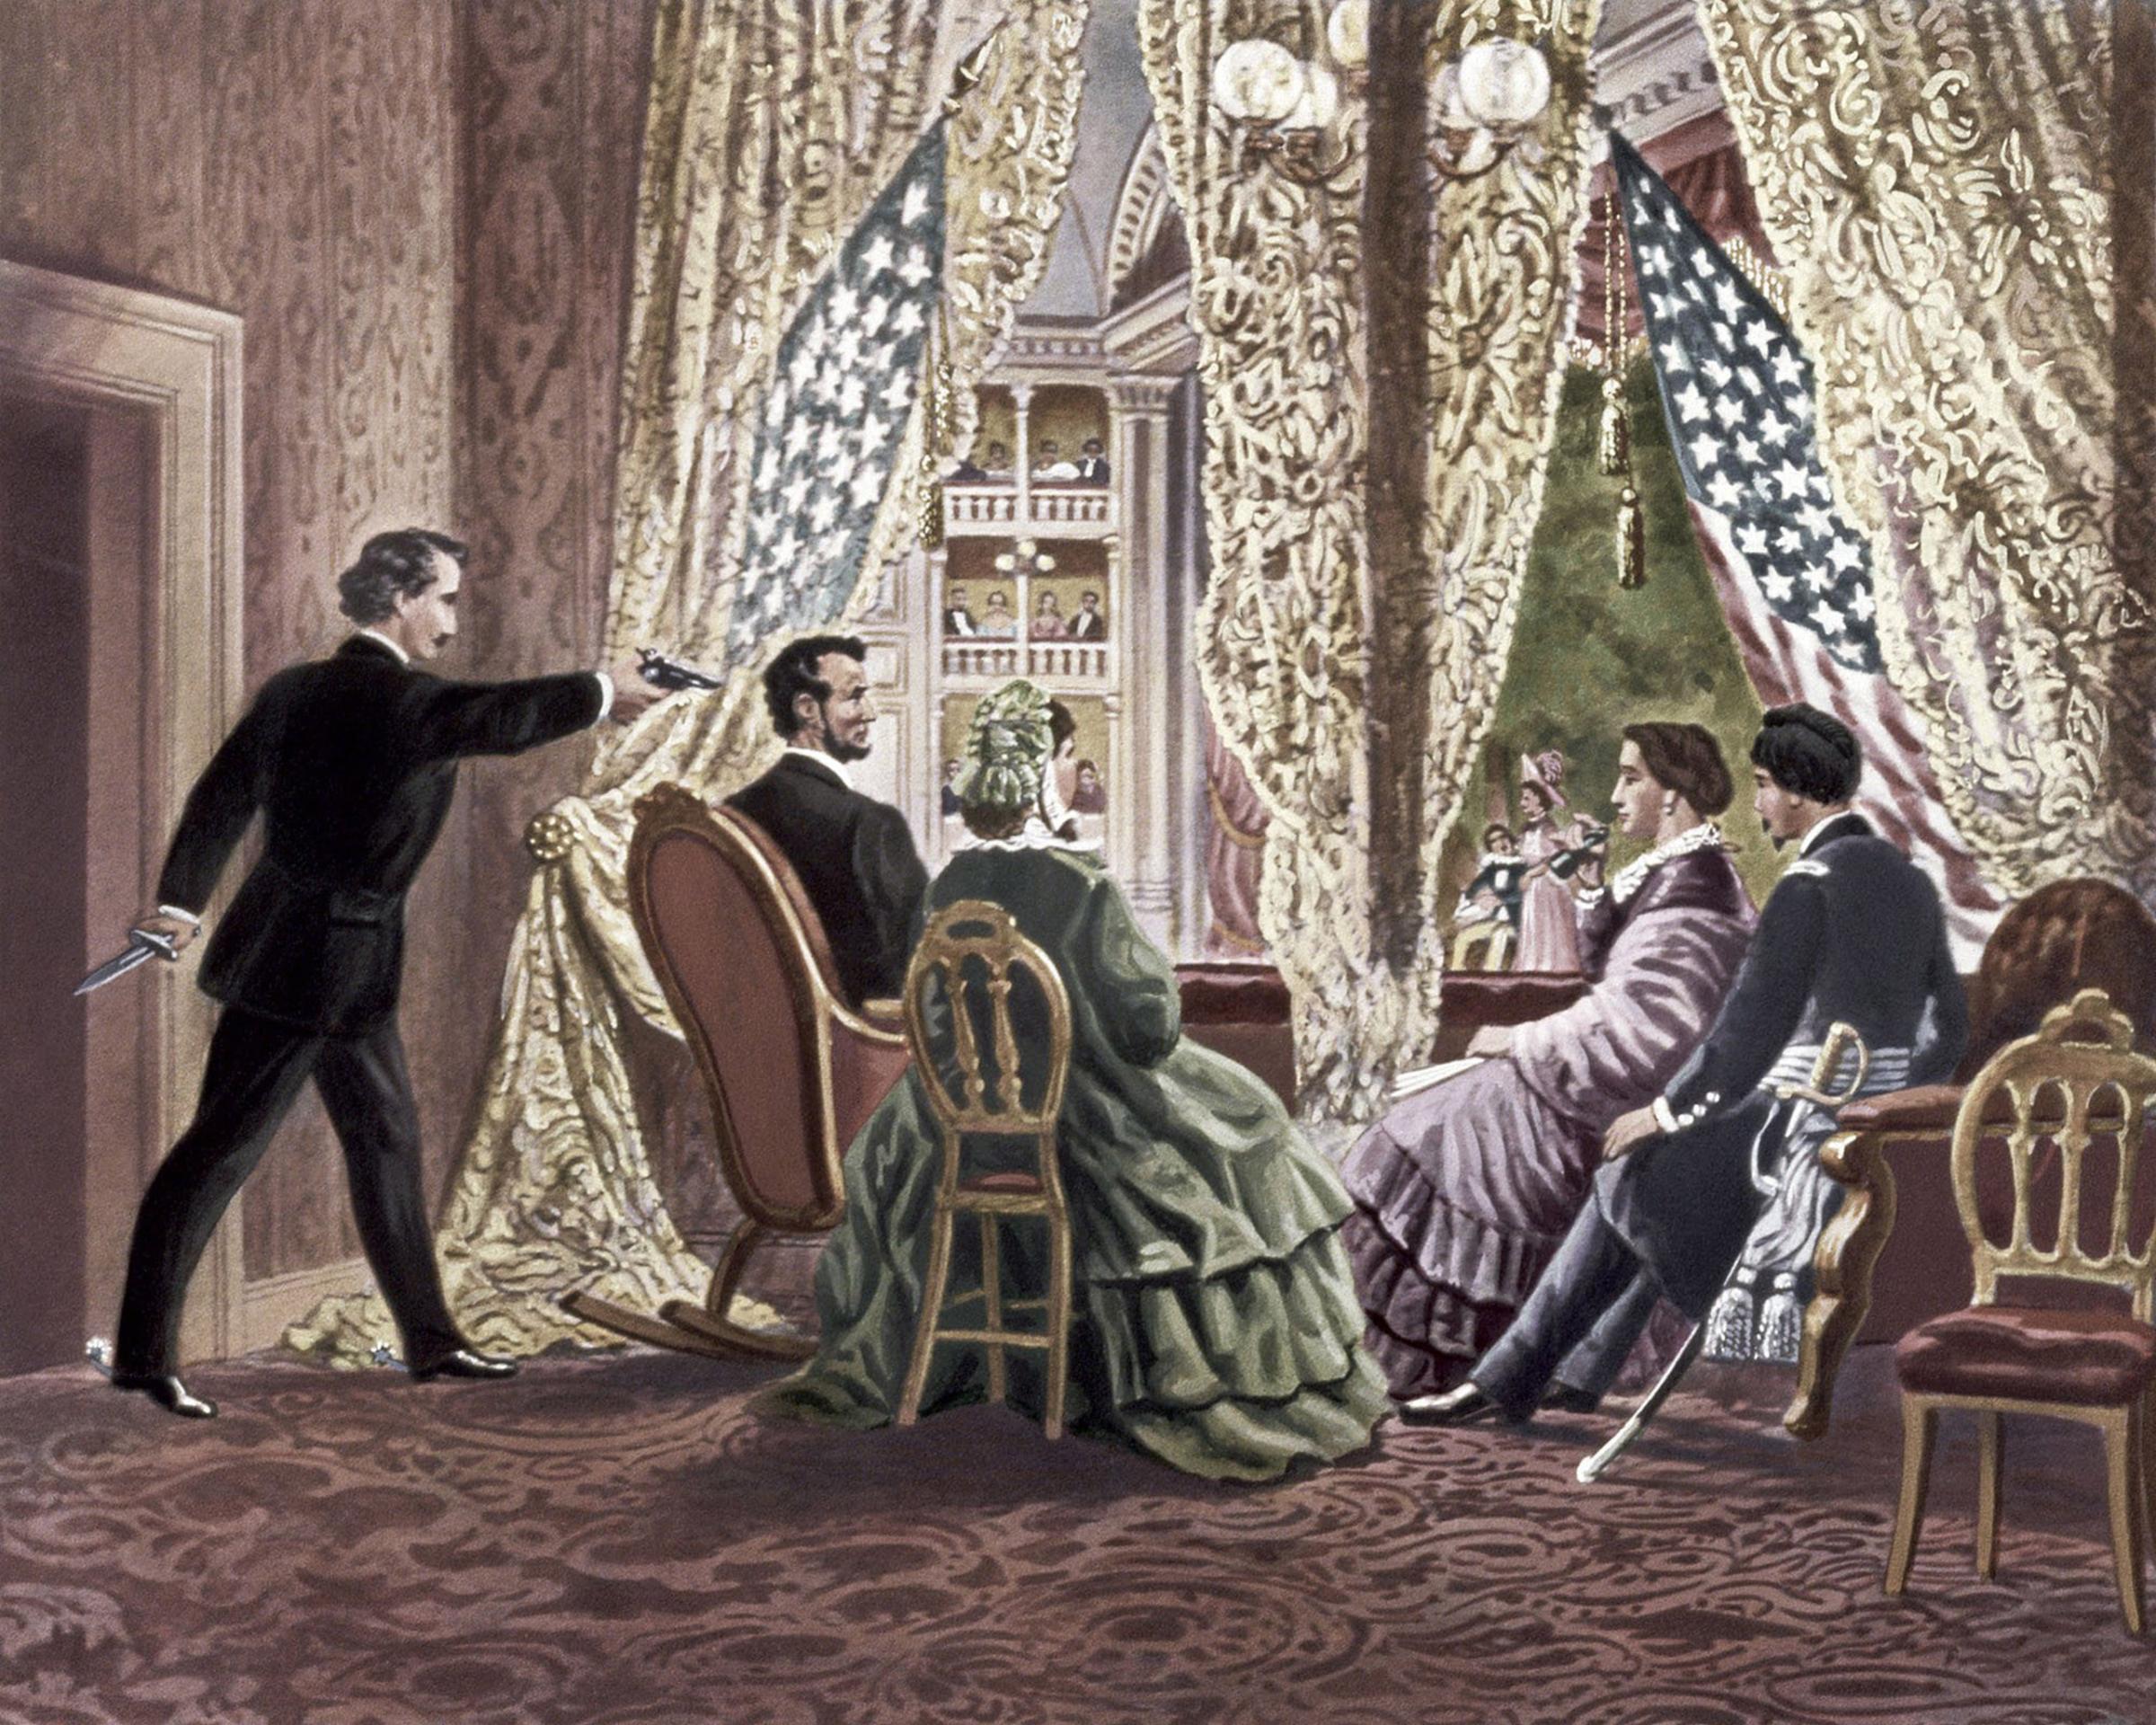 The Assassination of Abraham Lincoln, 1865